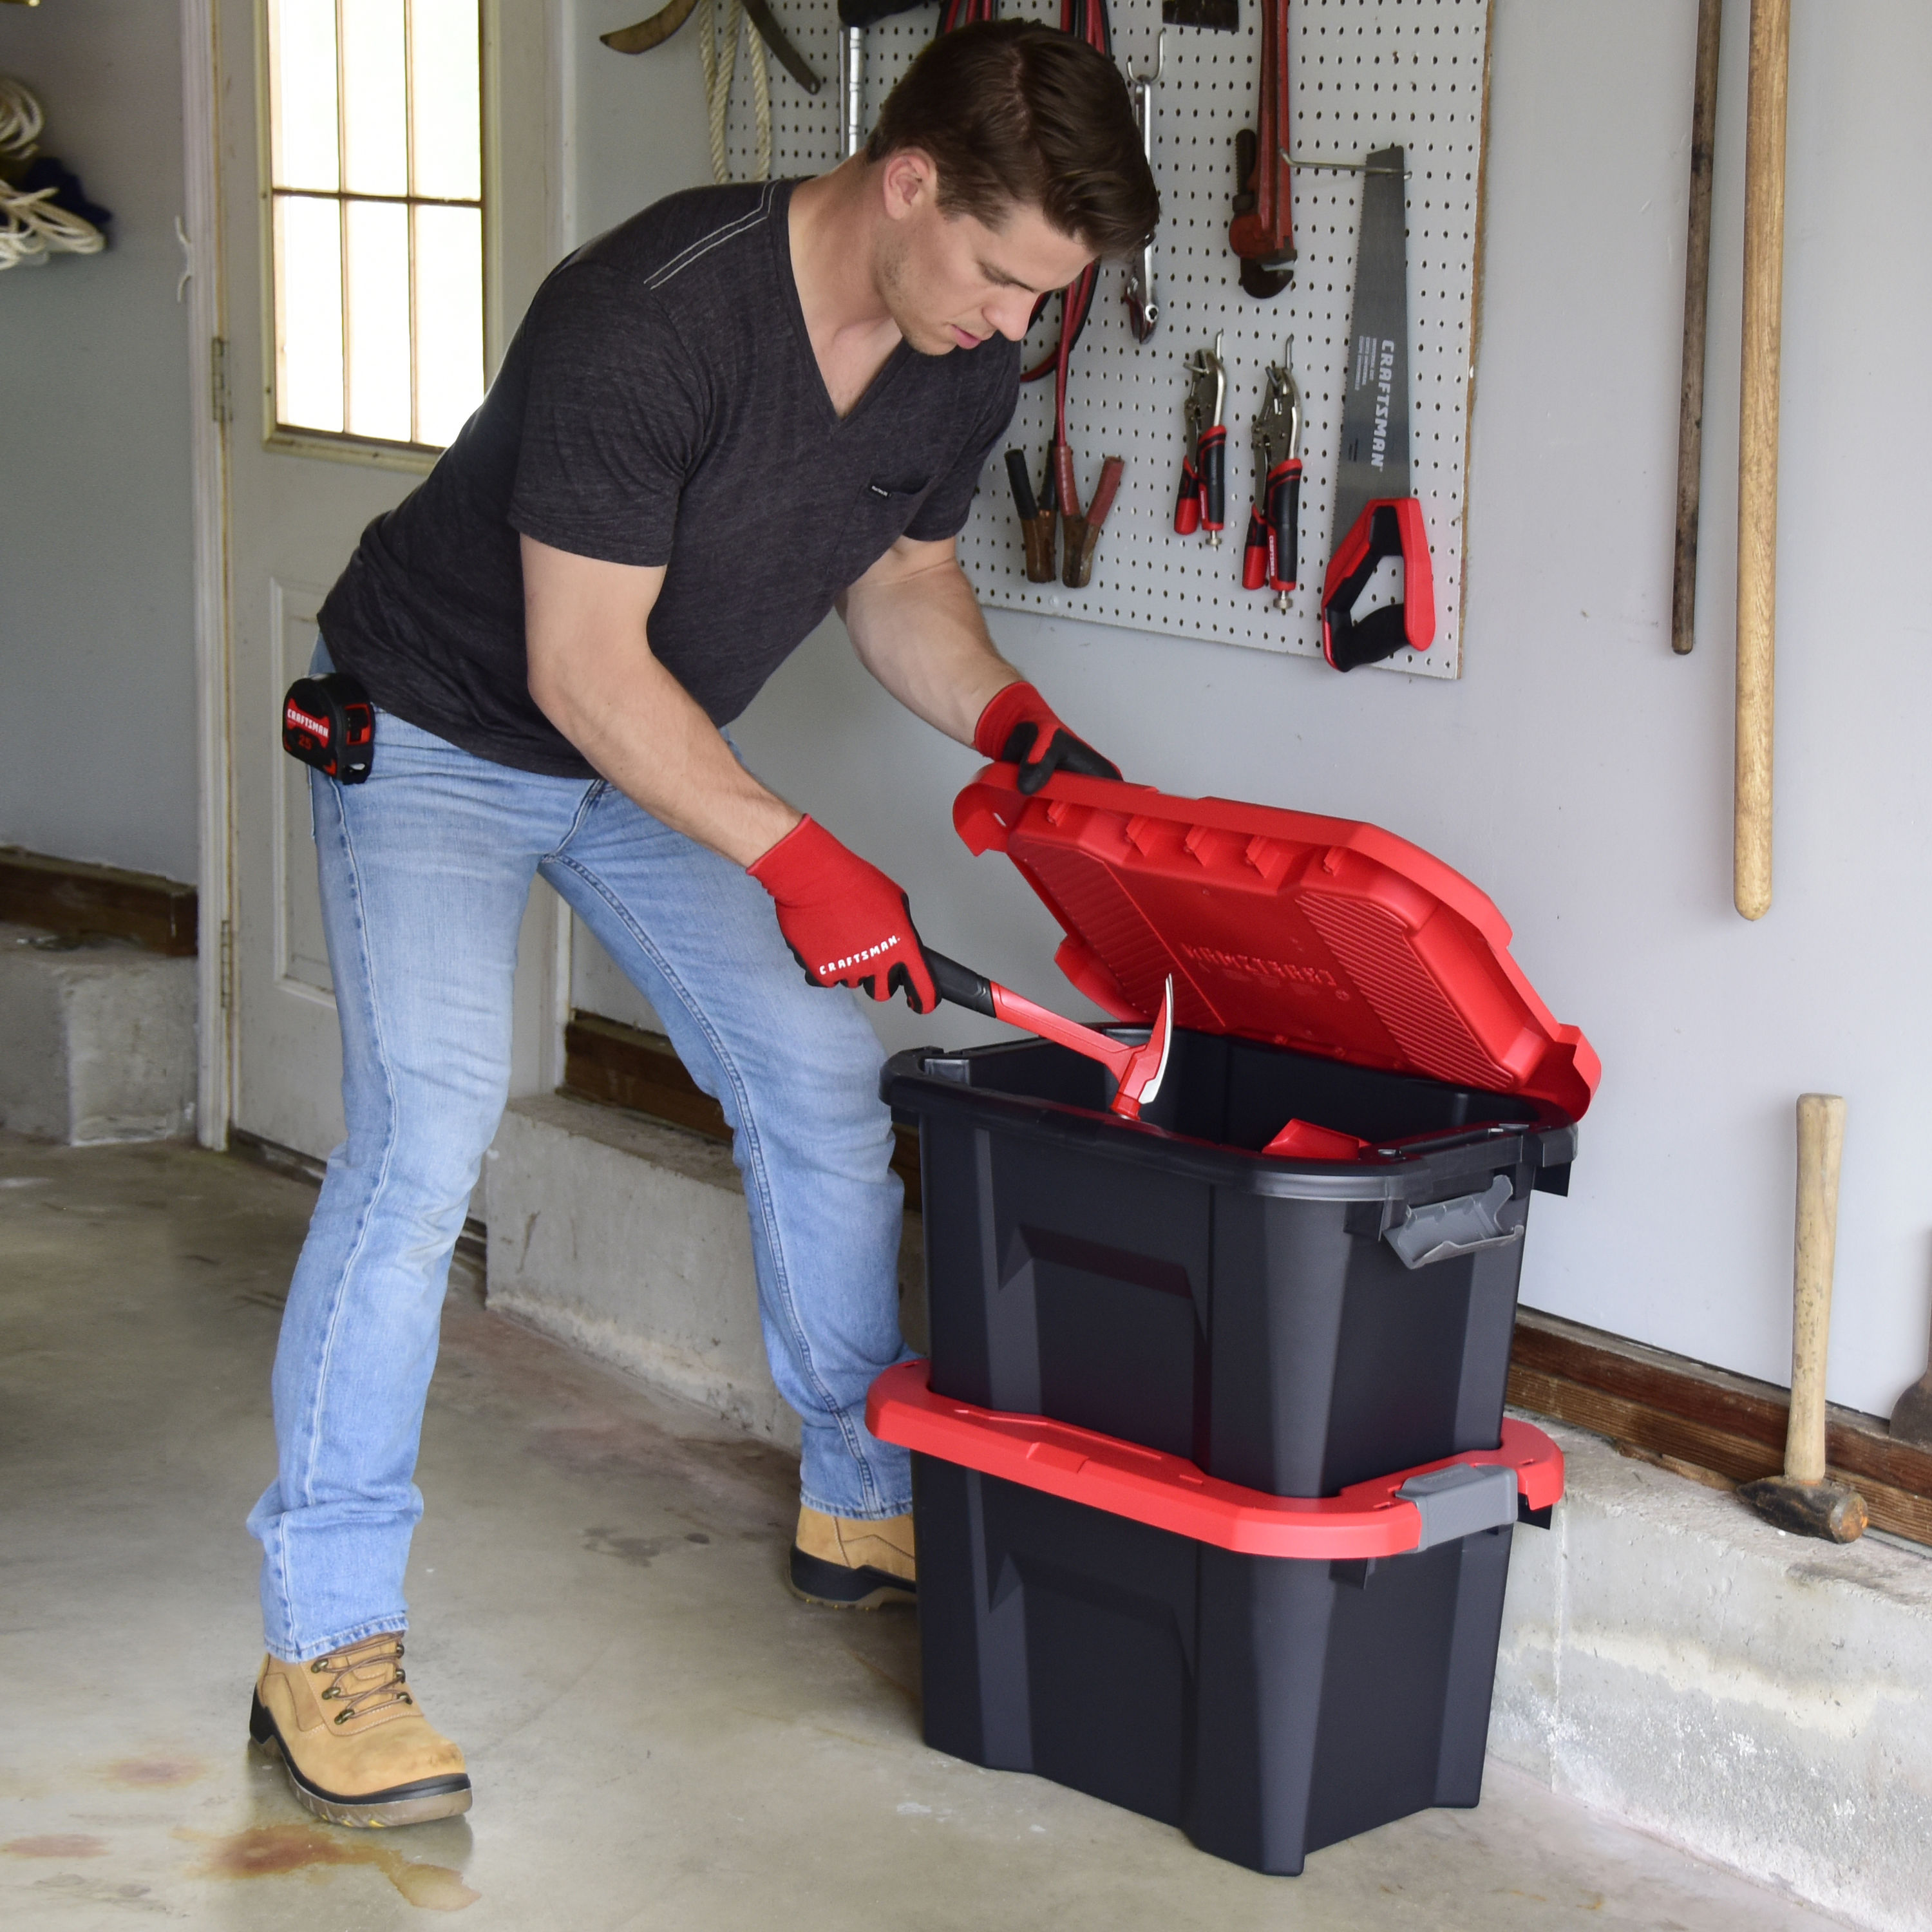 CX CRAFTSMAN, 10-Gallon Highly Durable Storage Bin & Dual Latching Lid,  (12.7”H x 15.7”W x 22.7”D), Versatile Stacking Tote and Weather-Resistant